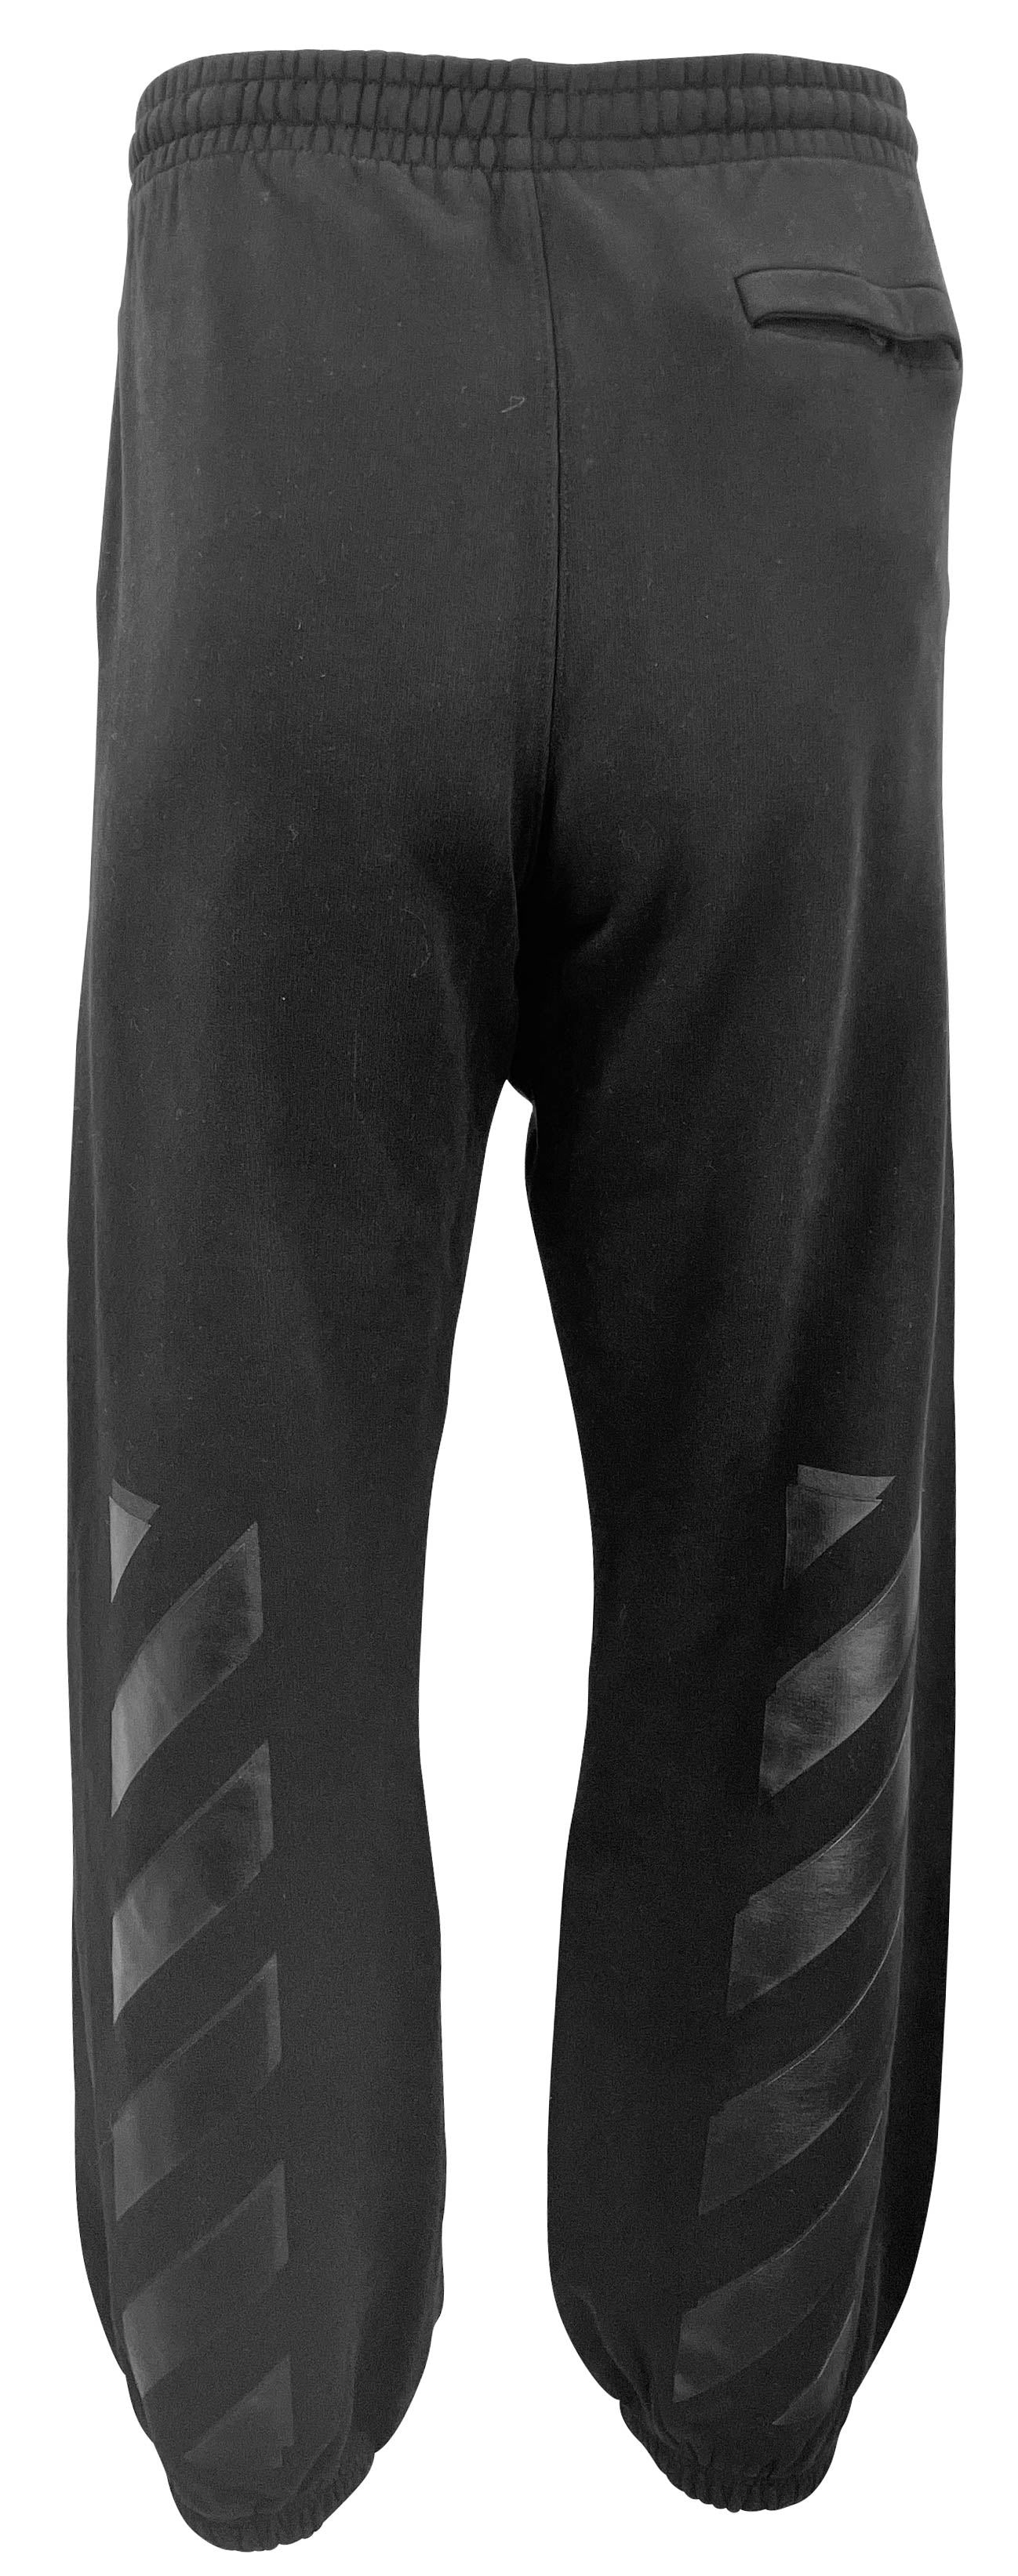 Off-White Diagonal Stripe Sweatpants in Black - Discounts on Off-White at UAL